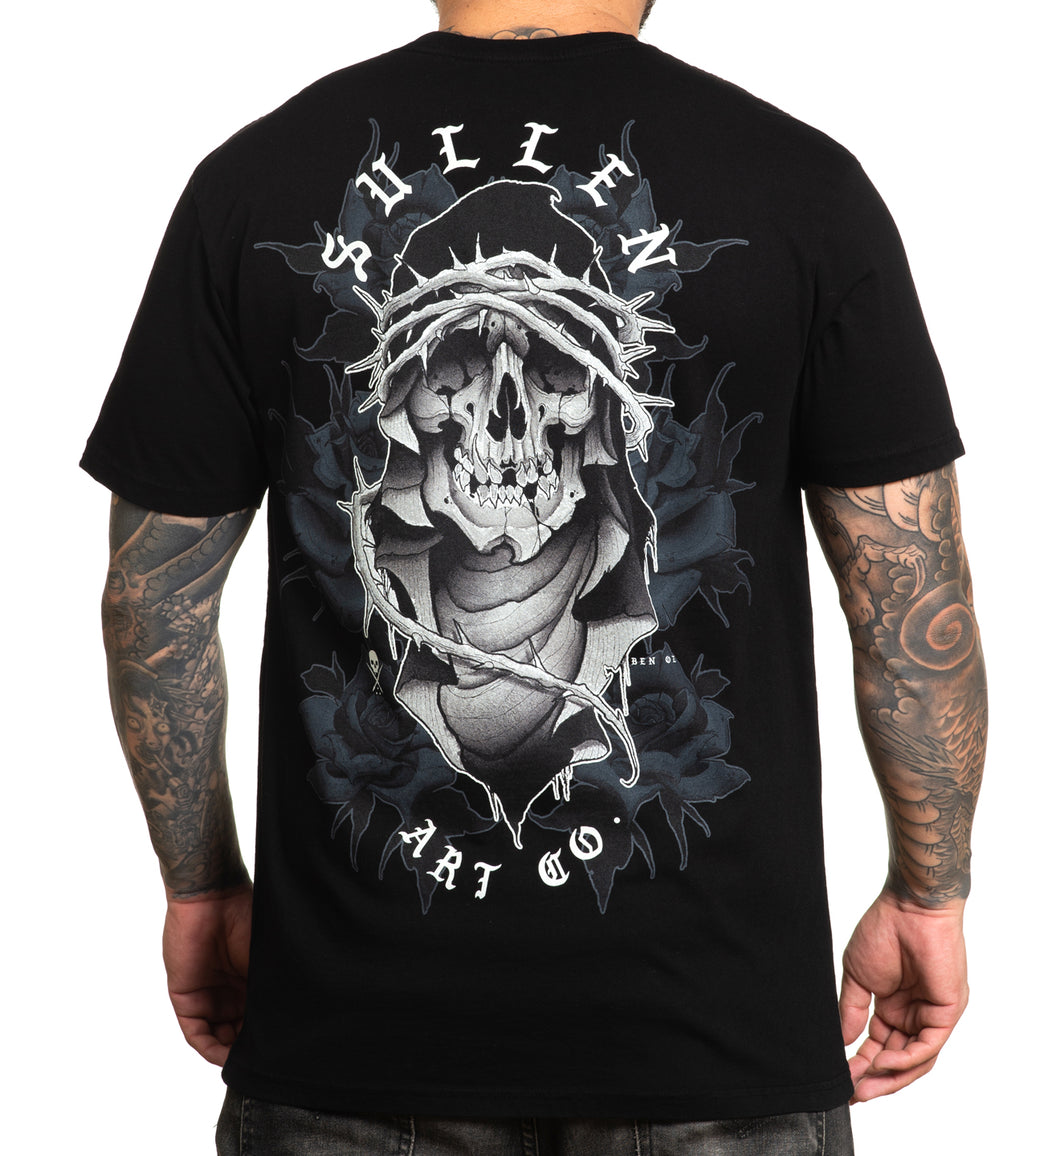 Reaper with crown of thorns in white on black tshirt